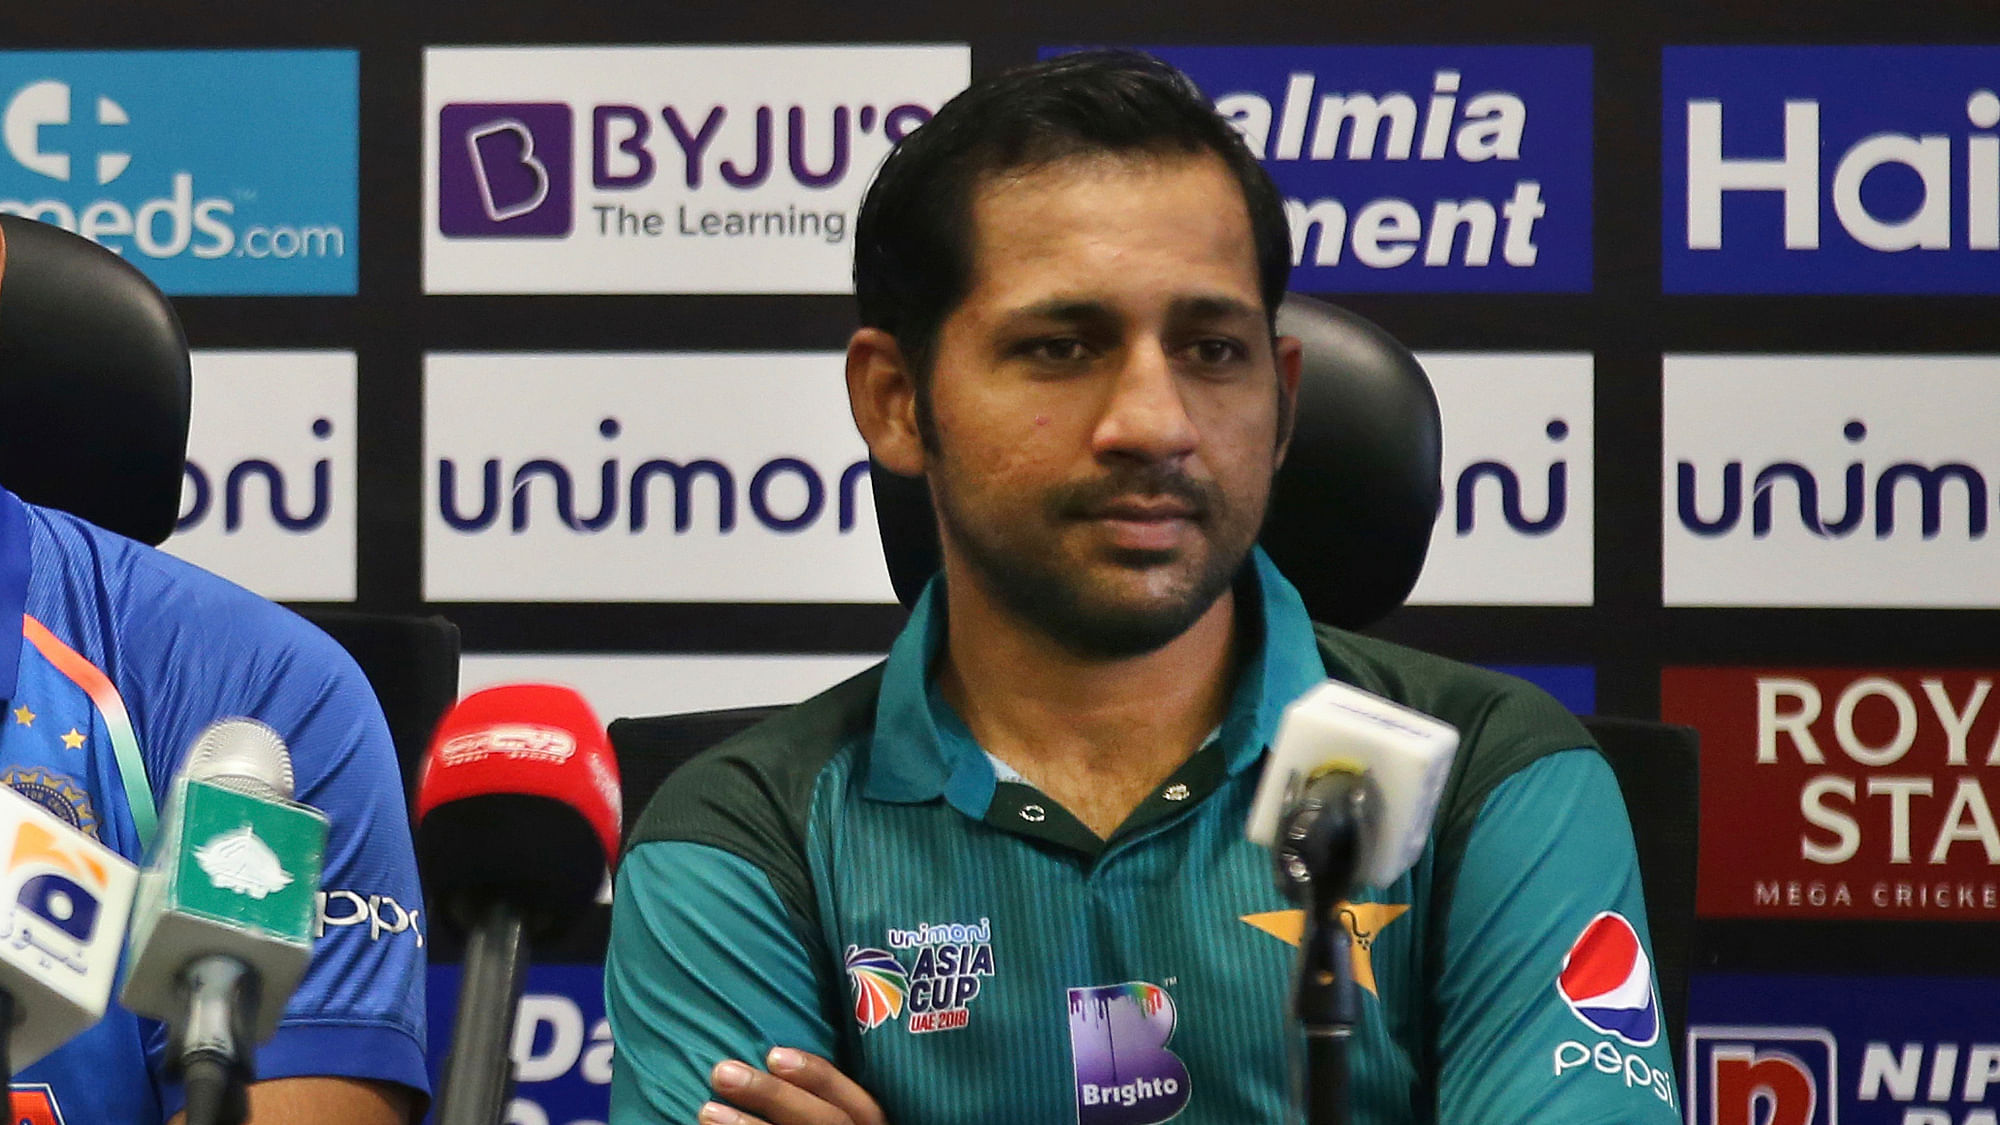 Pakistan captain Sarfraz Ahmed said he accepted his “mistake” after being banned for his racial remarks against a South African cricketer.